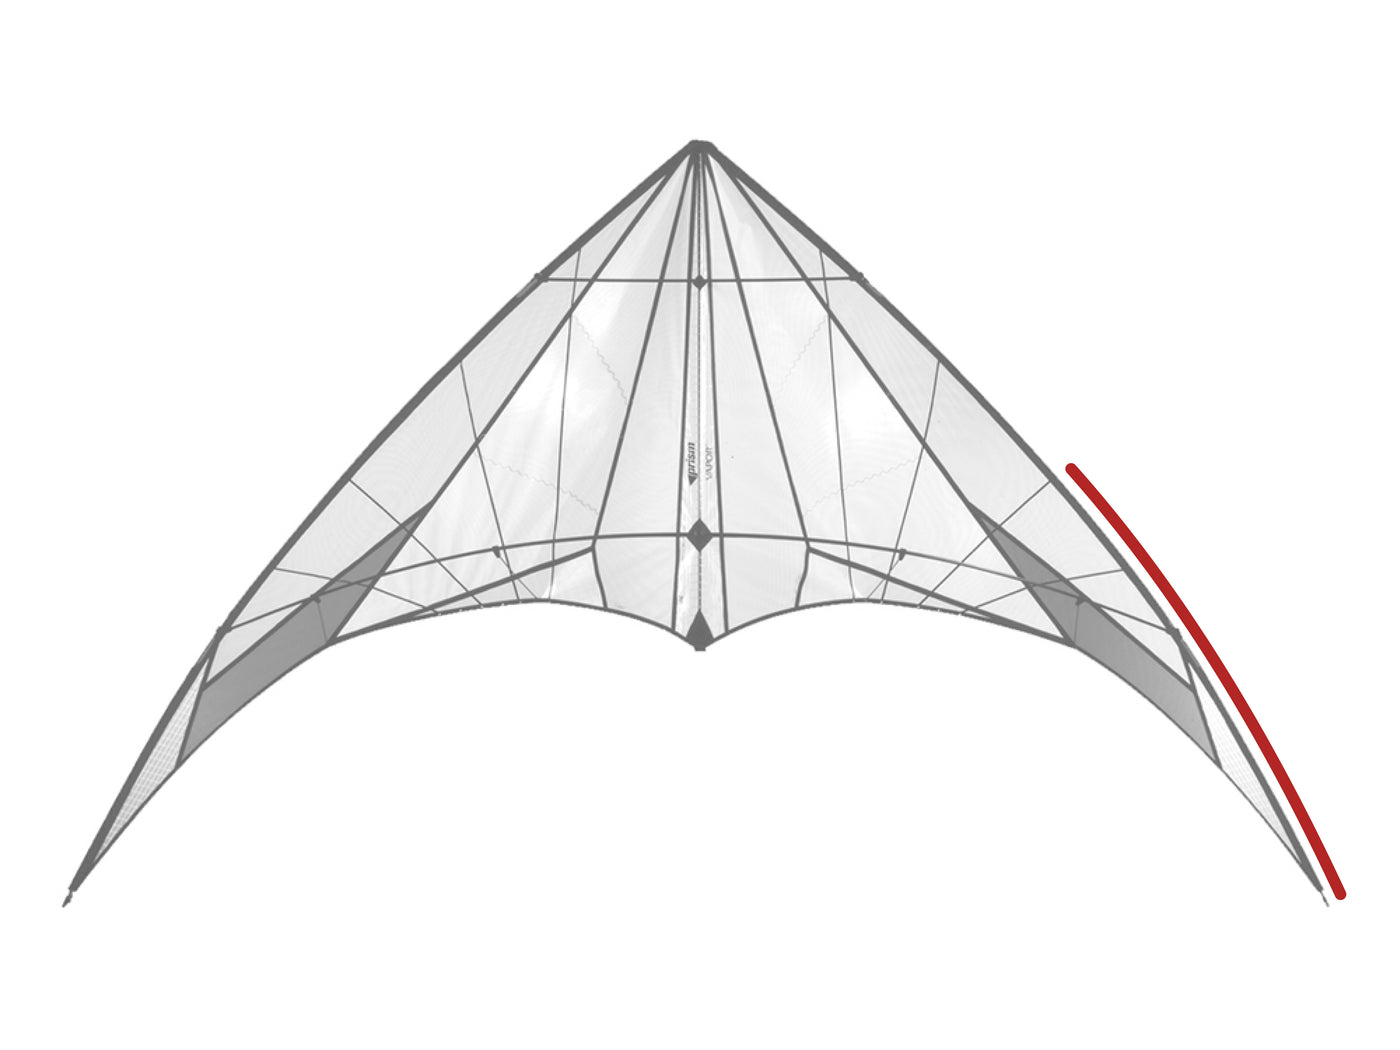 Diagram showing location of the Vapor (1996) Lower Leading Edge on the kite.